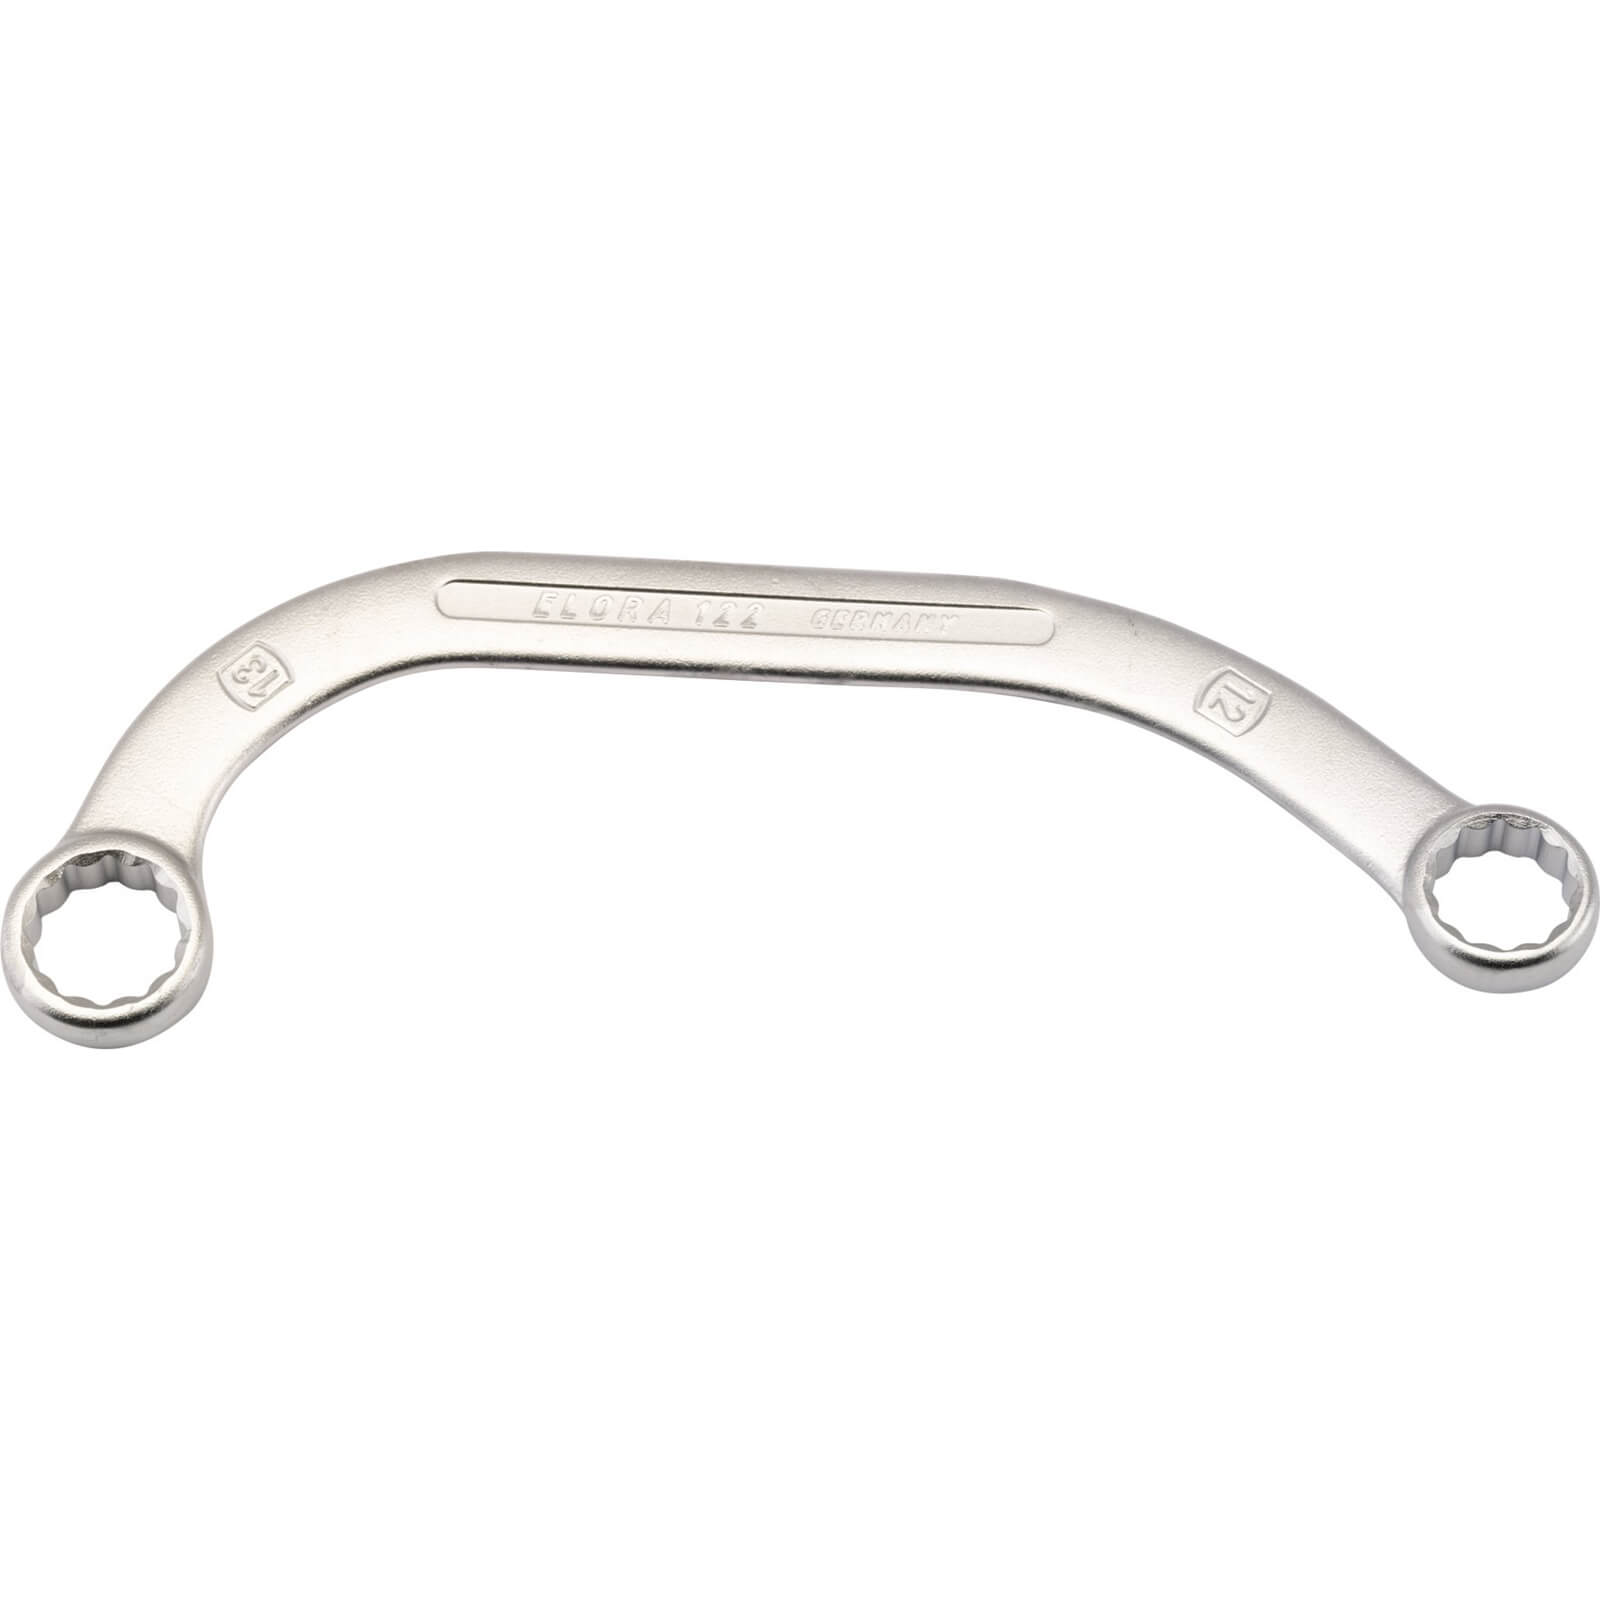 Photo of Elora Obstruction Ring Spanner 12mm X 13mm